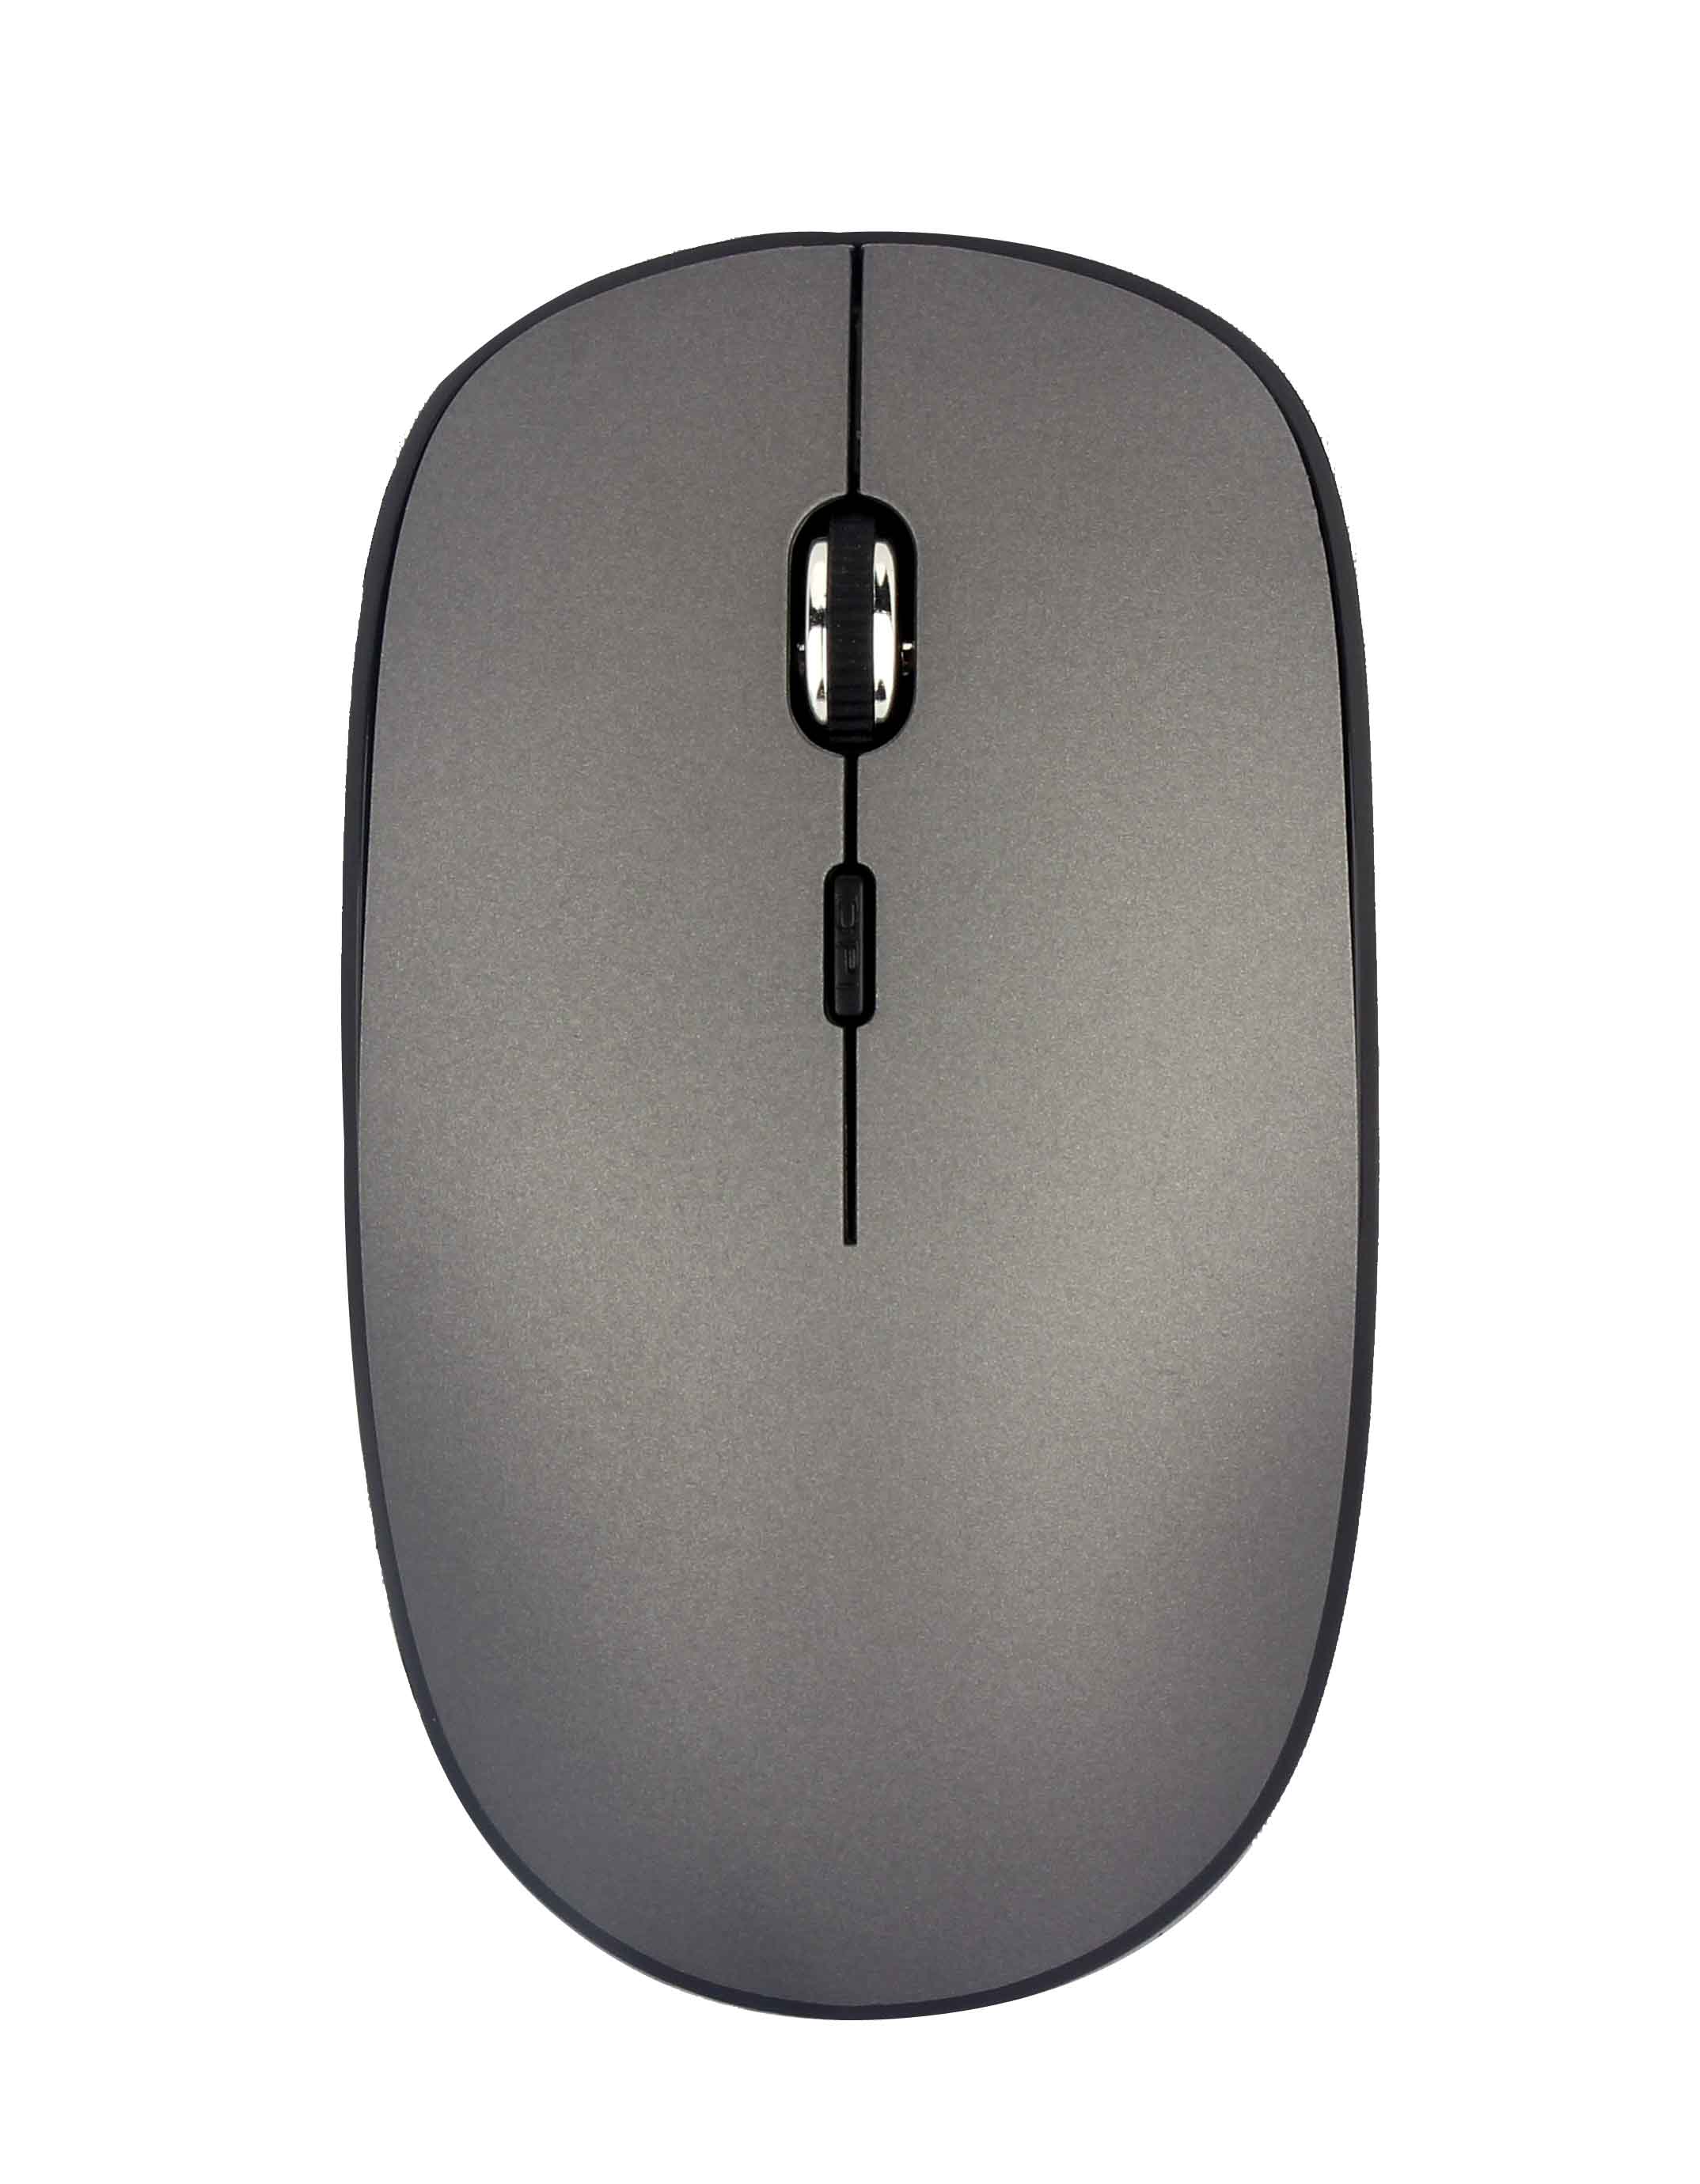 Big Slim Wireless Mouse,4D Button, 800/1200/1600 DPI, Rubber Oil Upper Case Finished